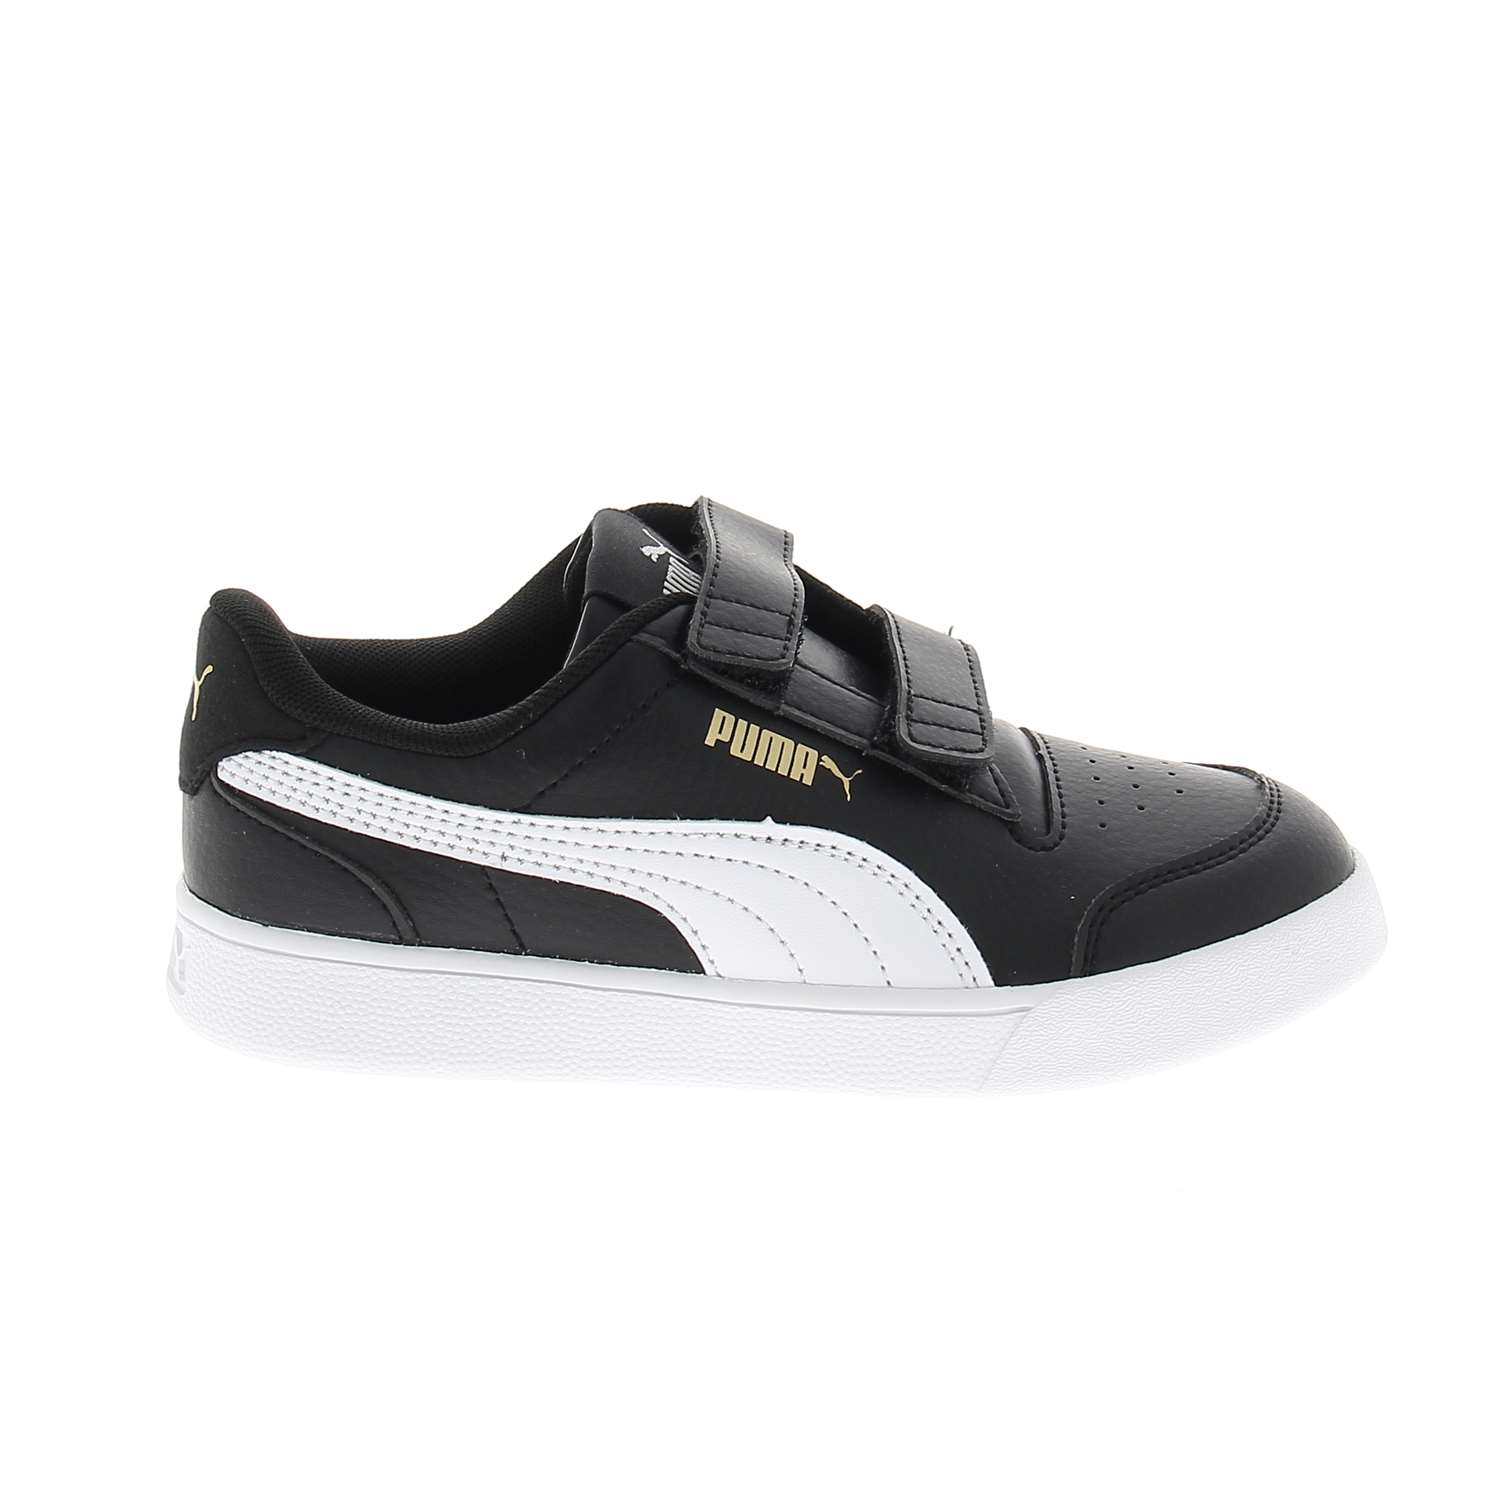 02 - SHUFFLE V INF PS - PUMA - Baskets - Synthétique